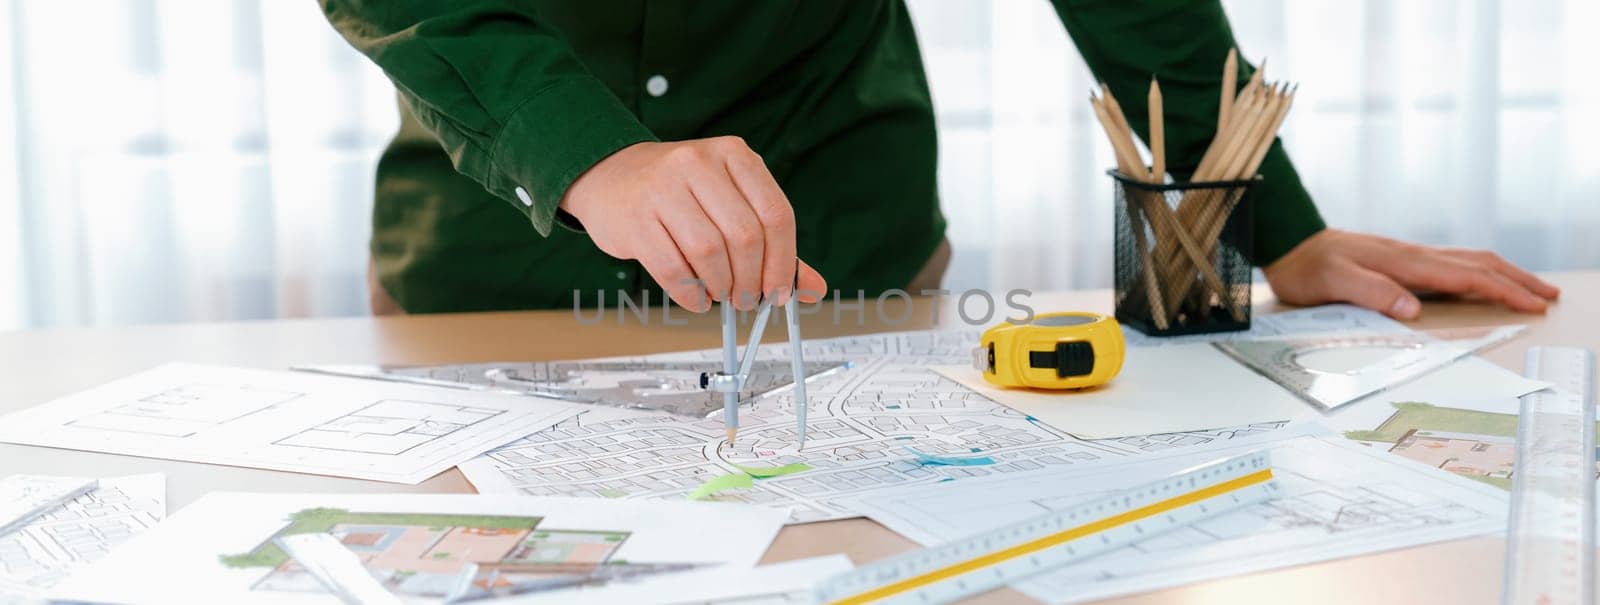 A portrait of architect using divider to measure blueprint. Architect designing house construction on a table at studio, with architectural equipment scattered around. Focus on hand. Delineation